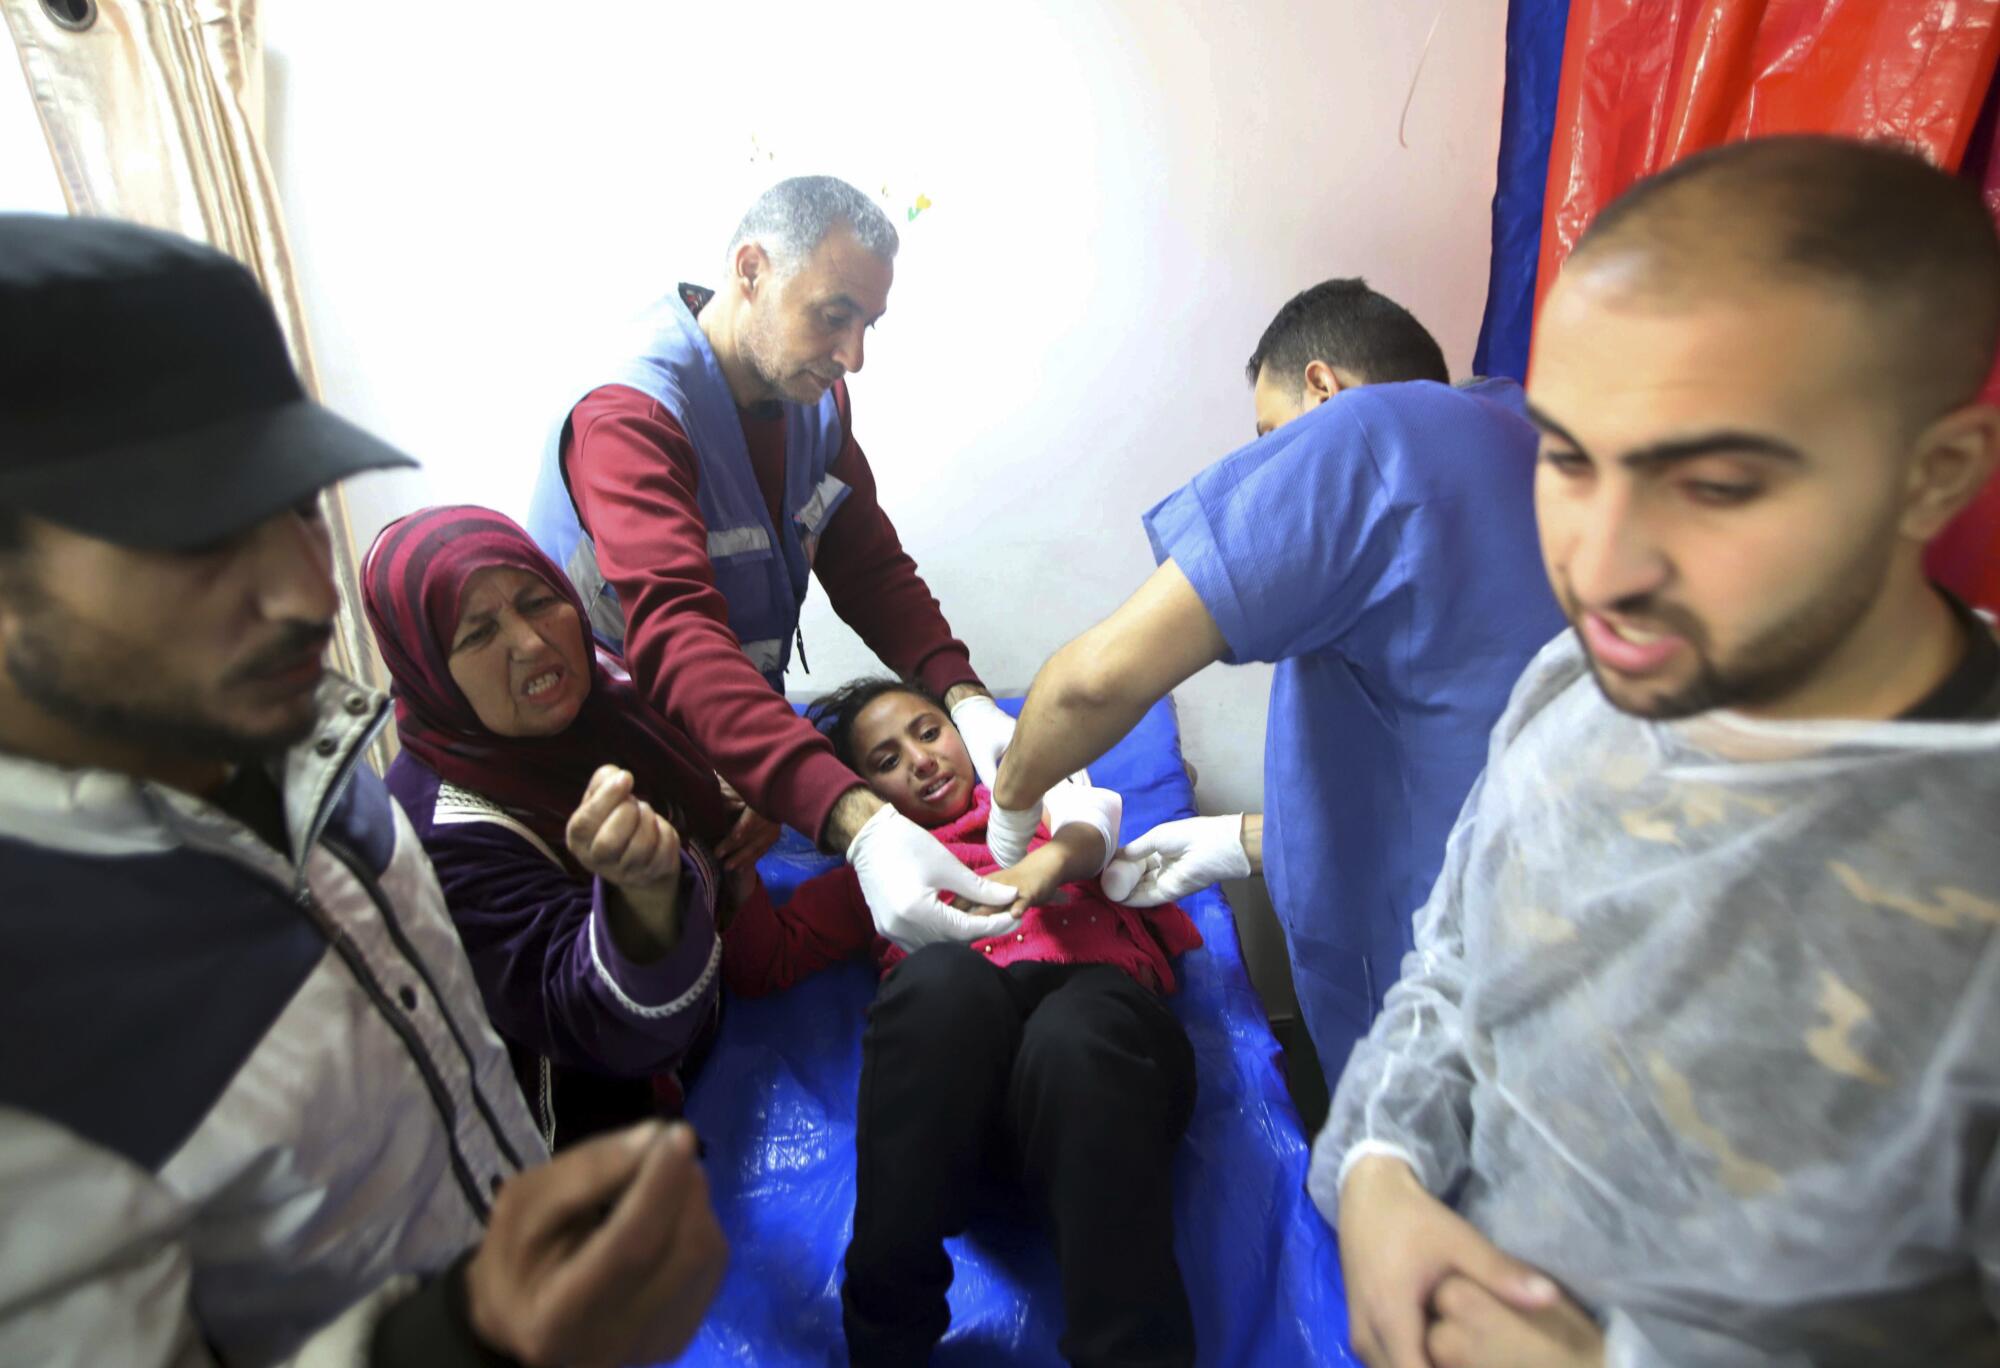 Medics treating wounded girl in Gaza